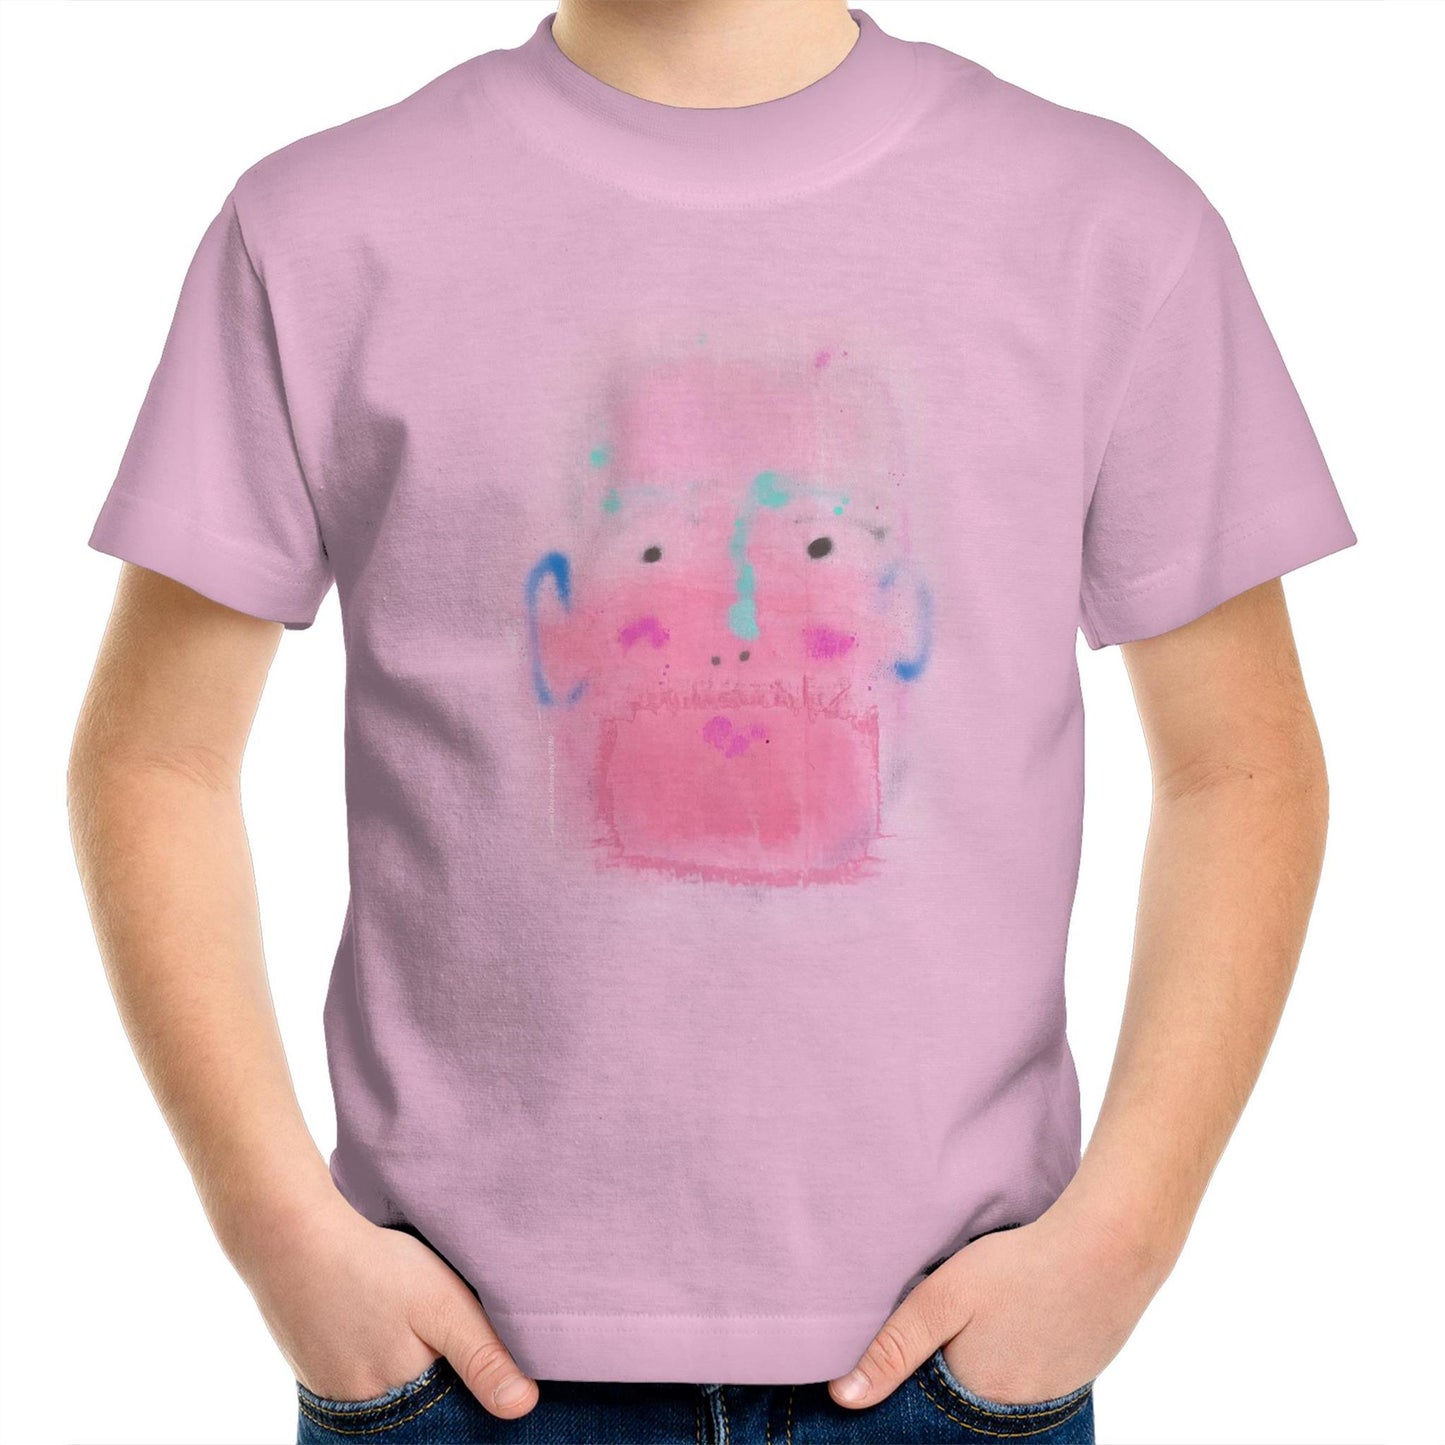 Red Face T Shirts for Kids